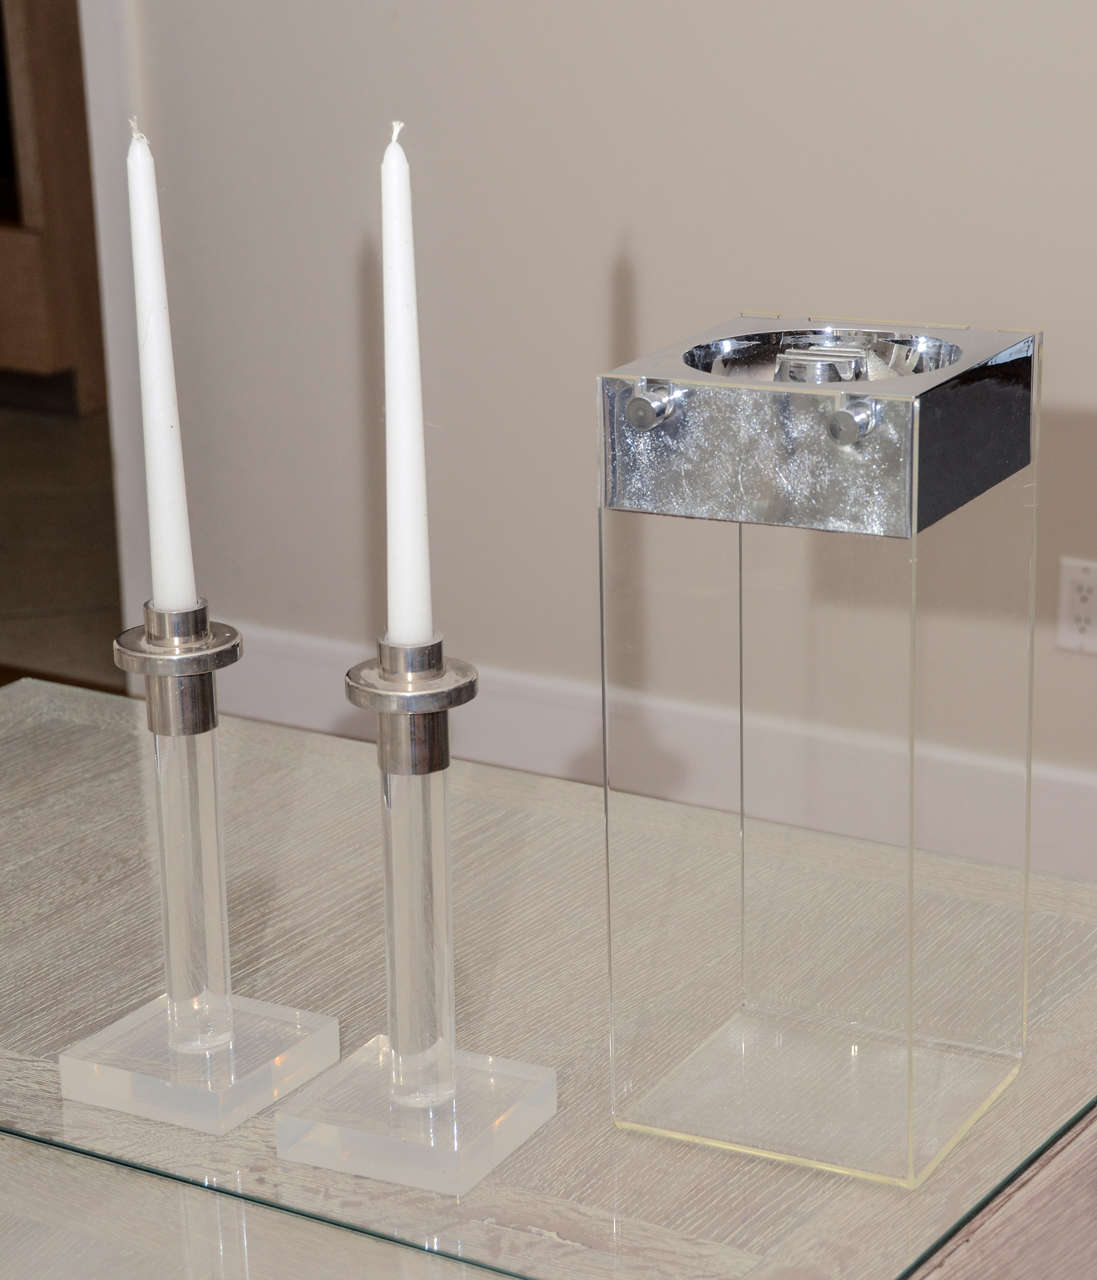 Standing ashtray with removable metal tray  on lucite frame. Also pair of  lucite/metal  candlesticks. Candlesticks height is 10 inches. Ashtray height is 15 inches. Each item can also be purchased separately. Call for price.